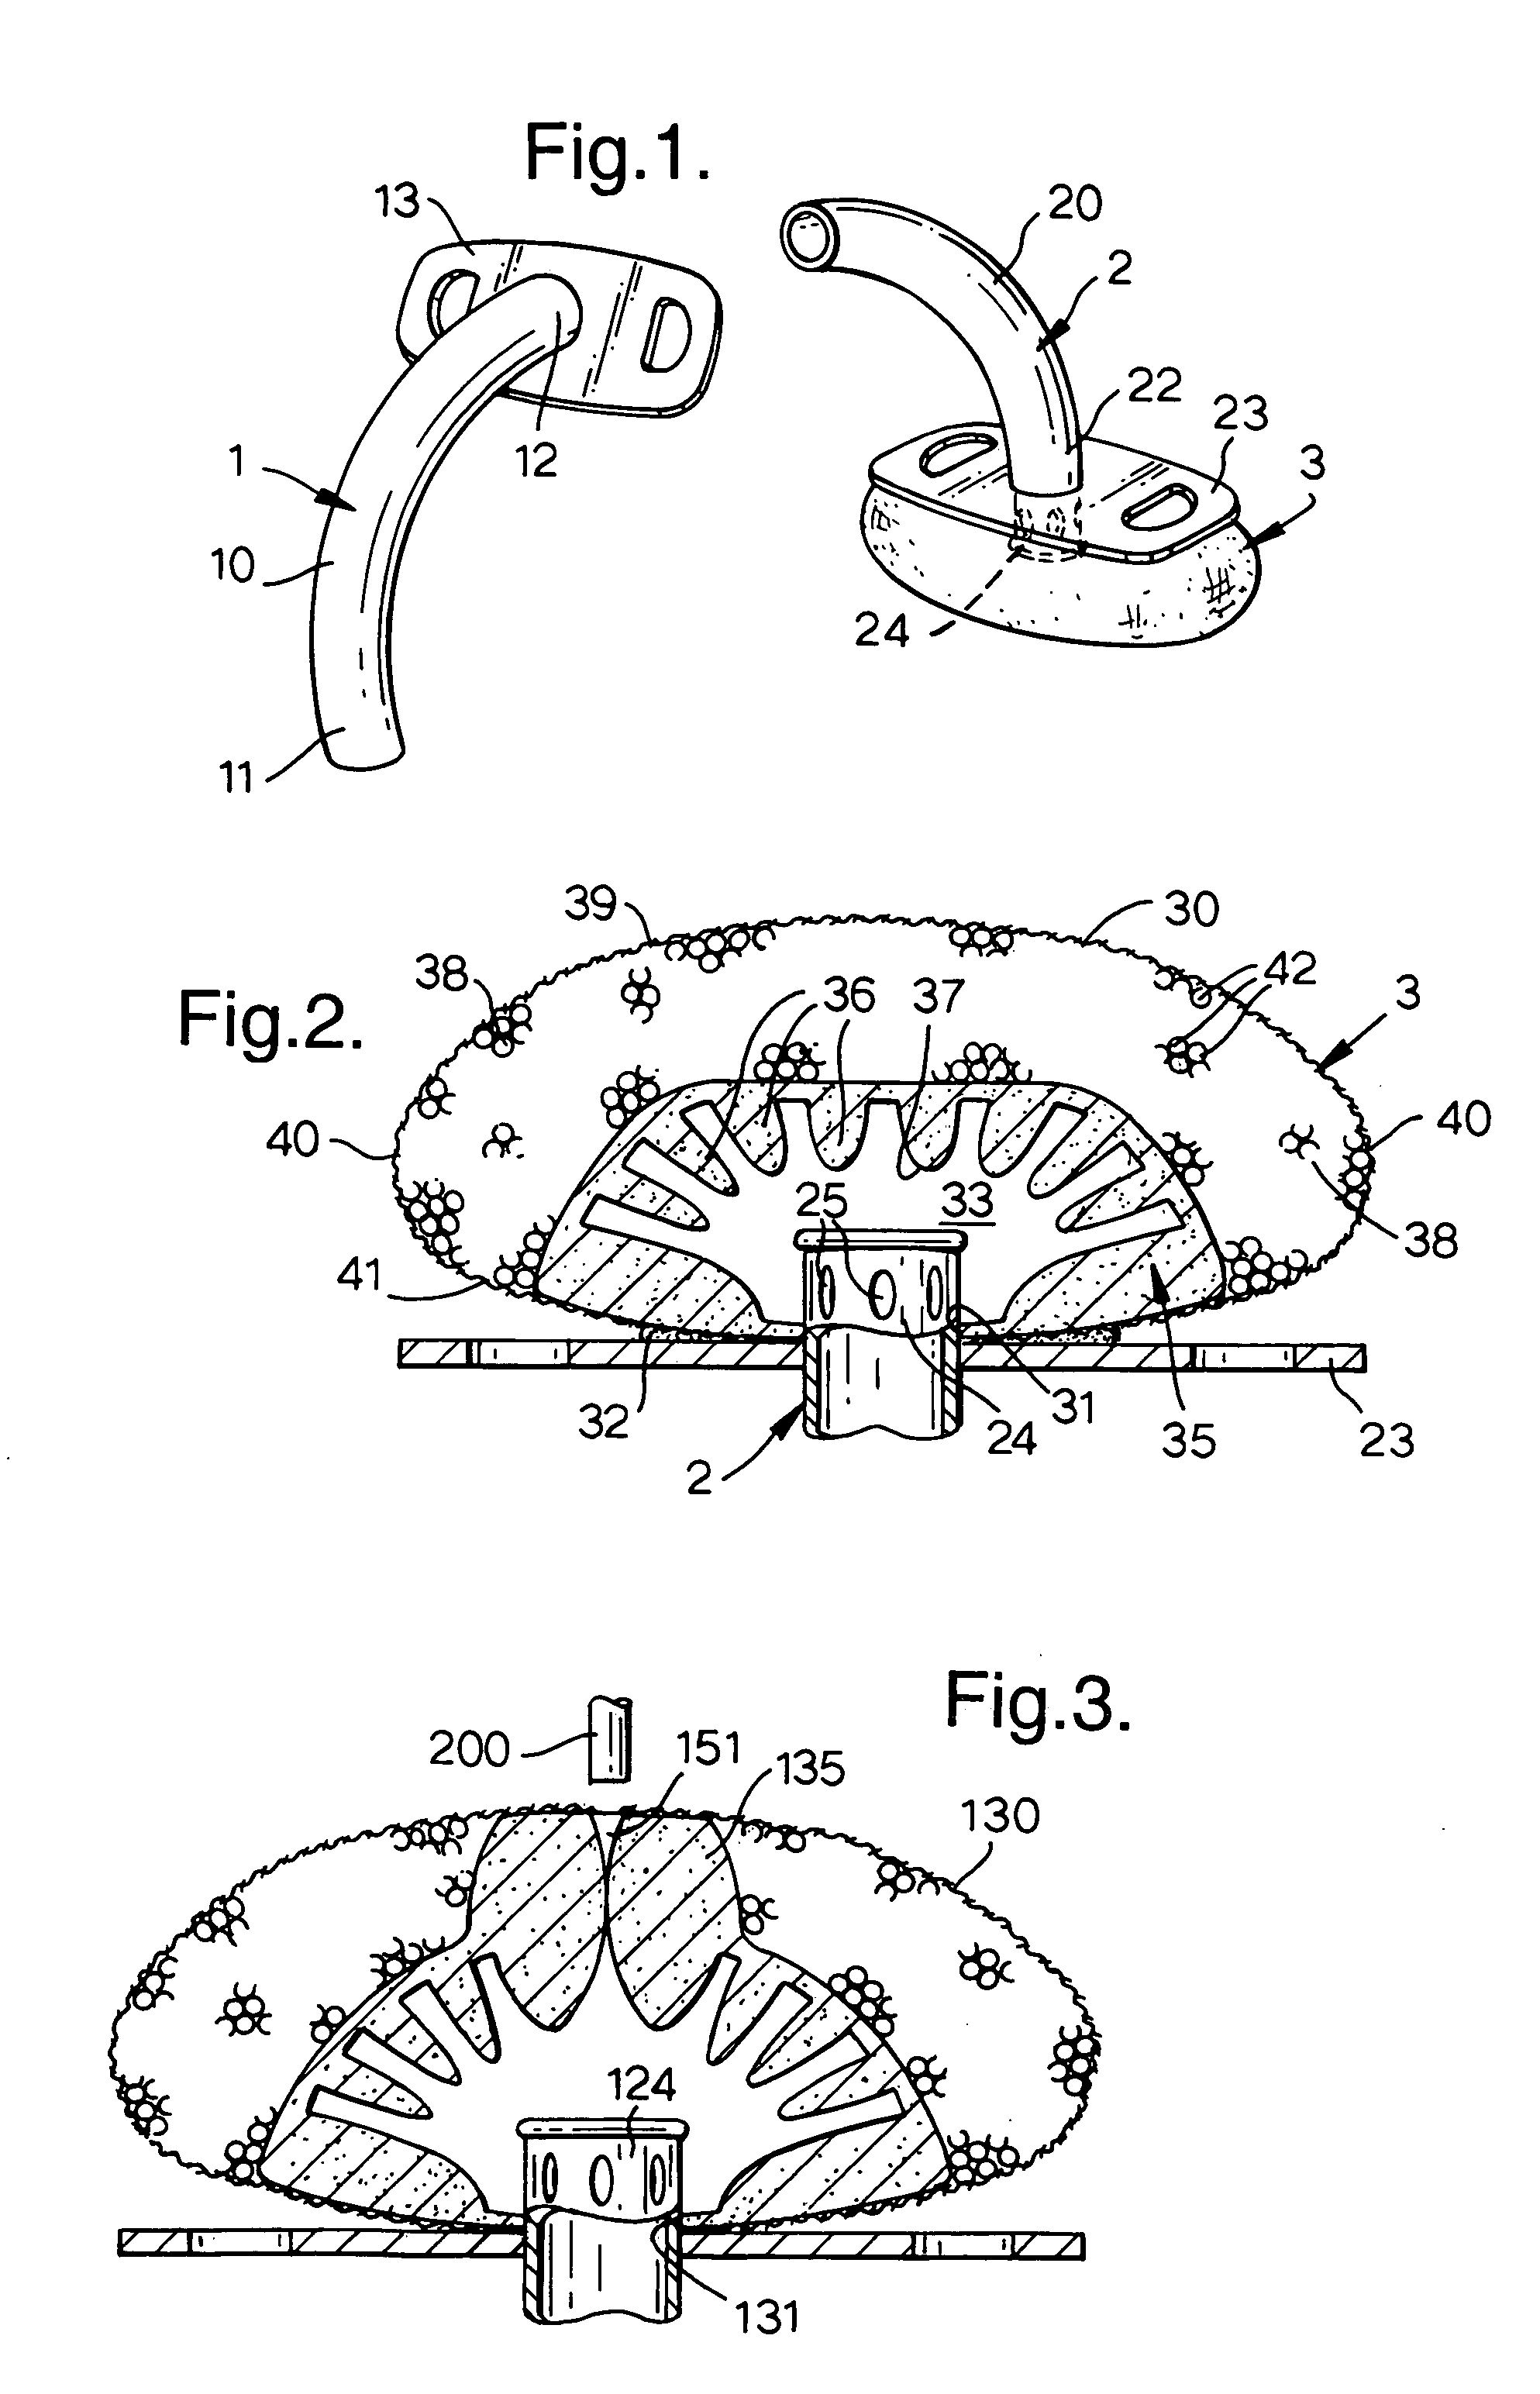 Gas-treatment devices